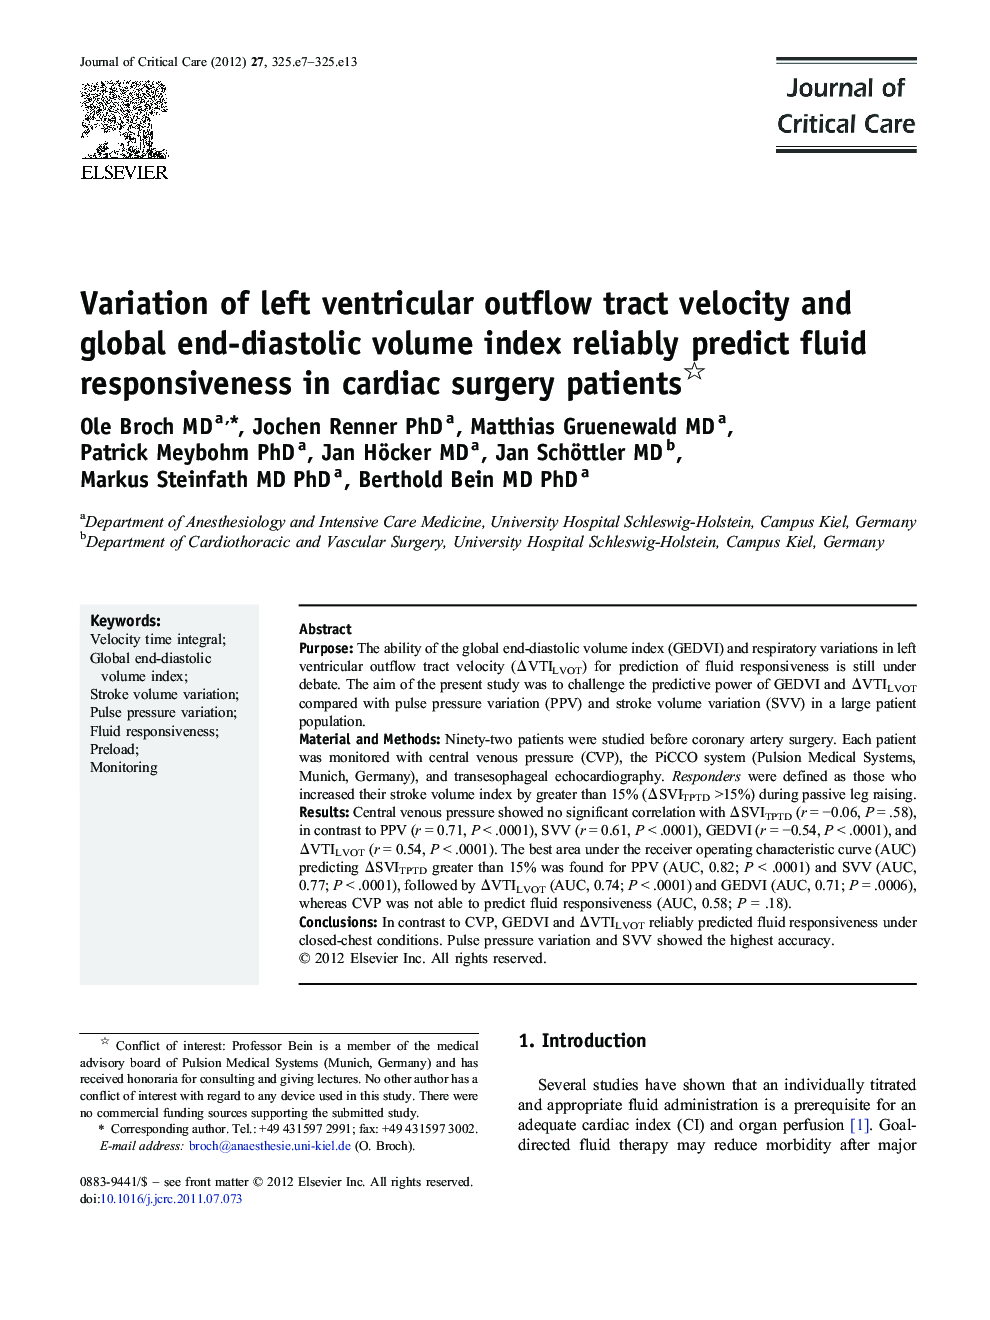 Variation of left ventricular outflow tract velocity and global end-diastolic volume index reliably predict fluid responsiveness in cardiac surgery patients